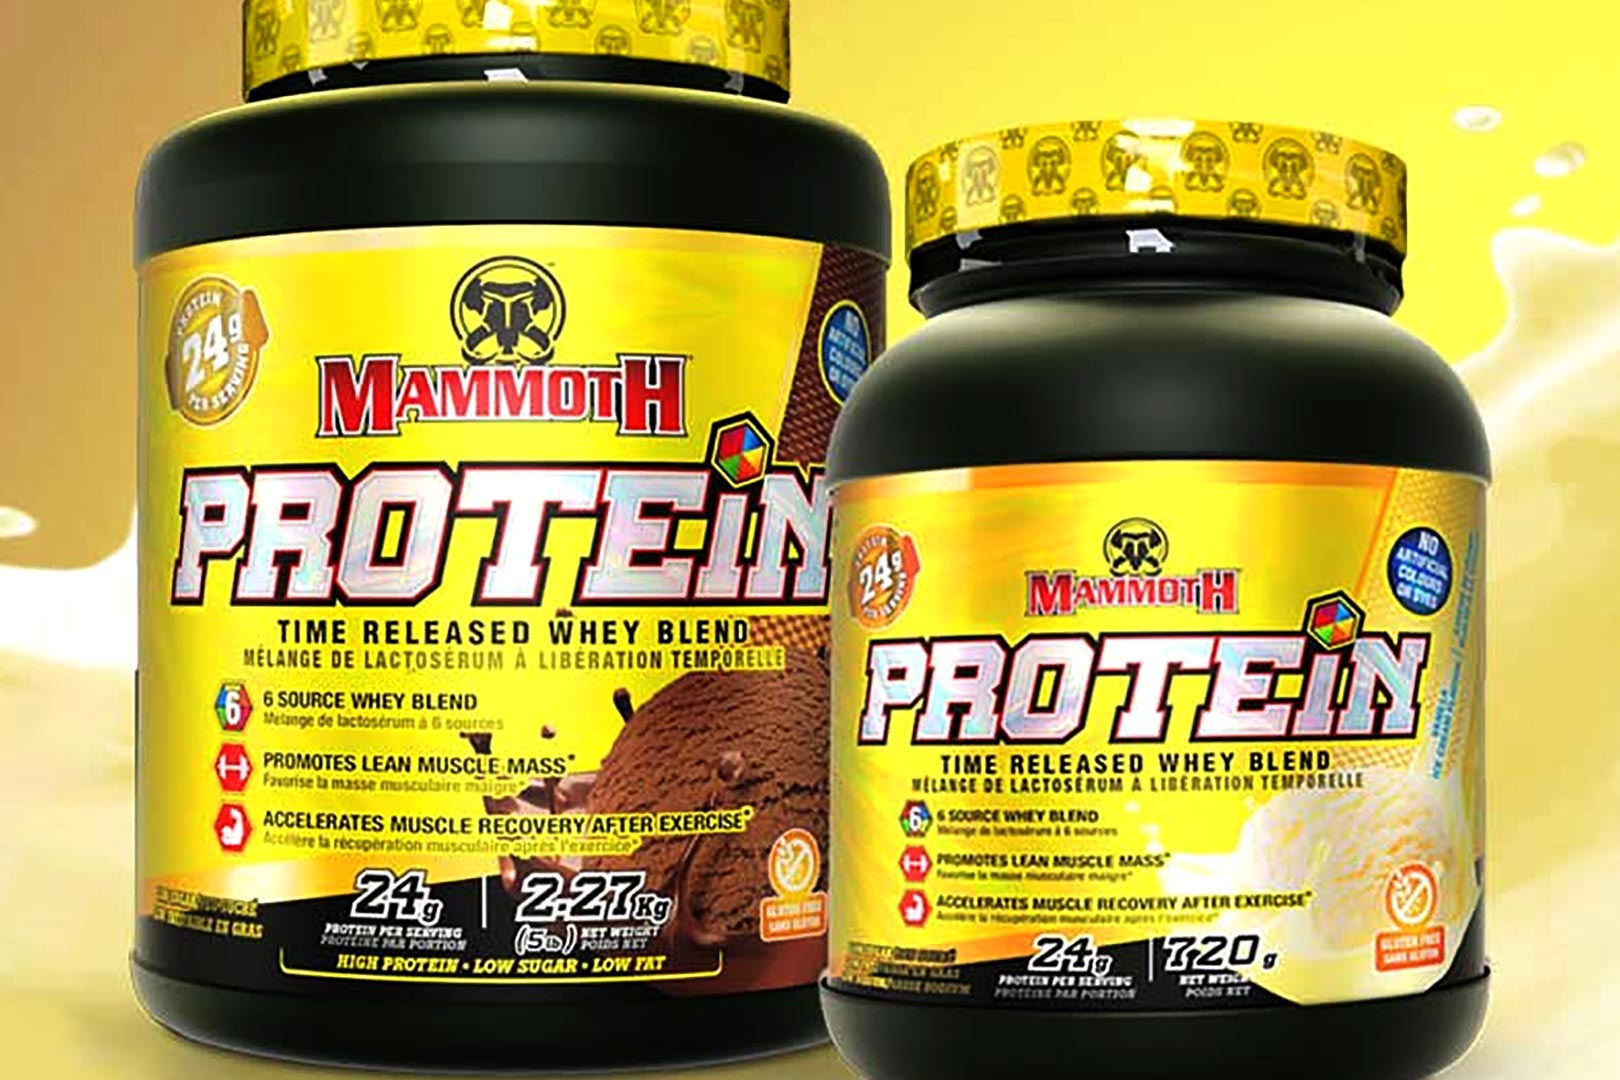 Mammoth Protein Full Details